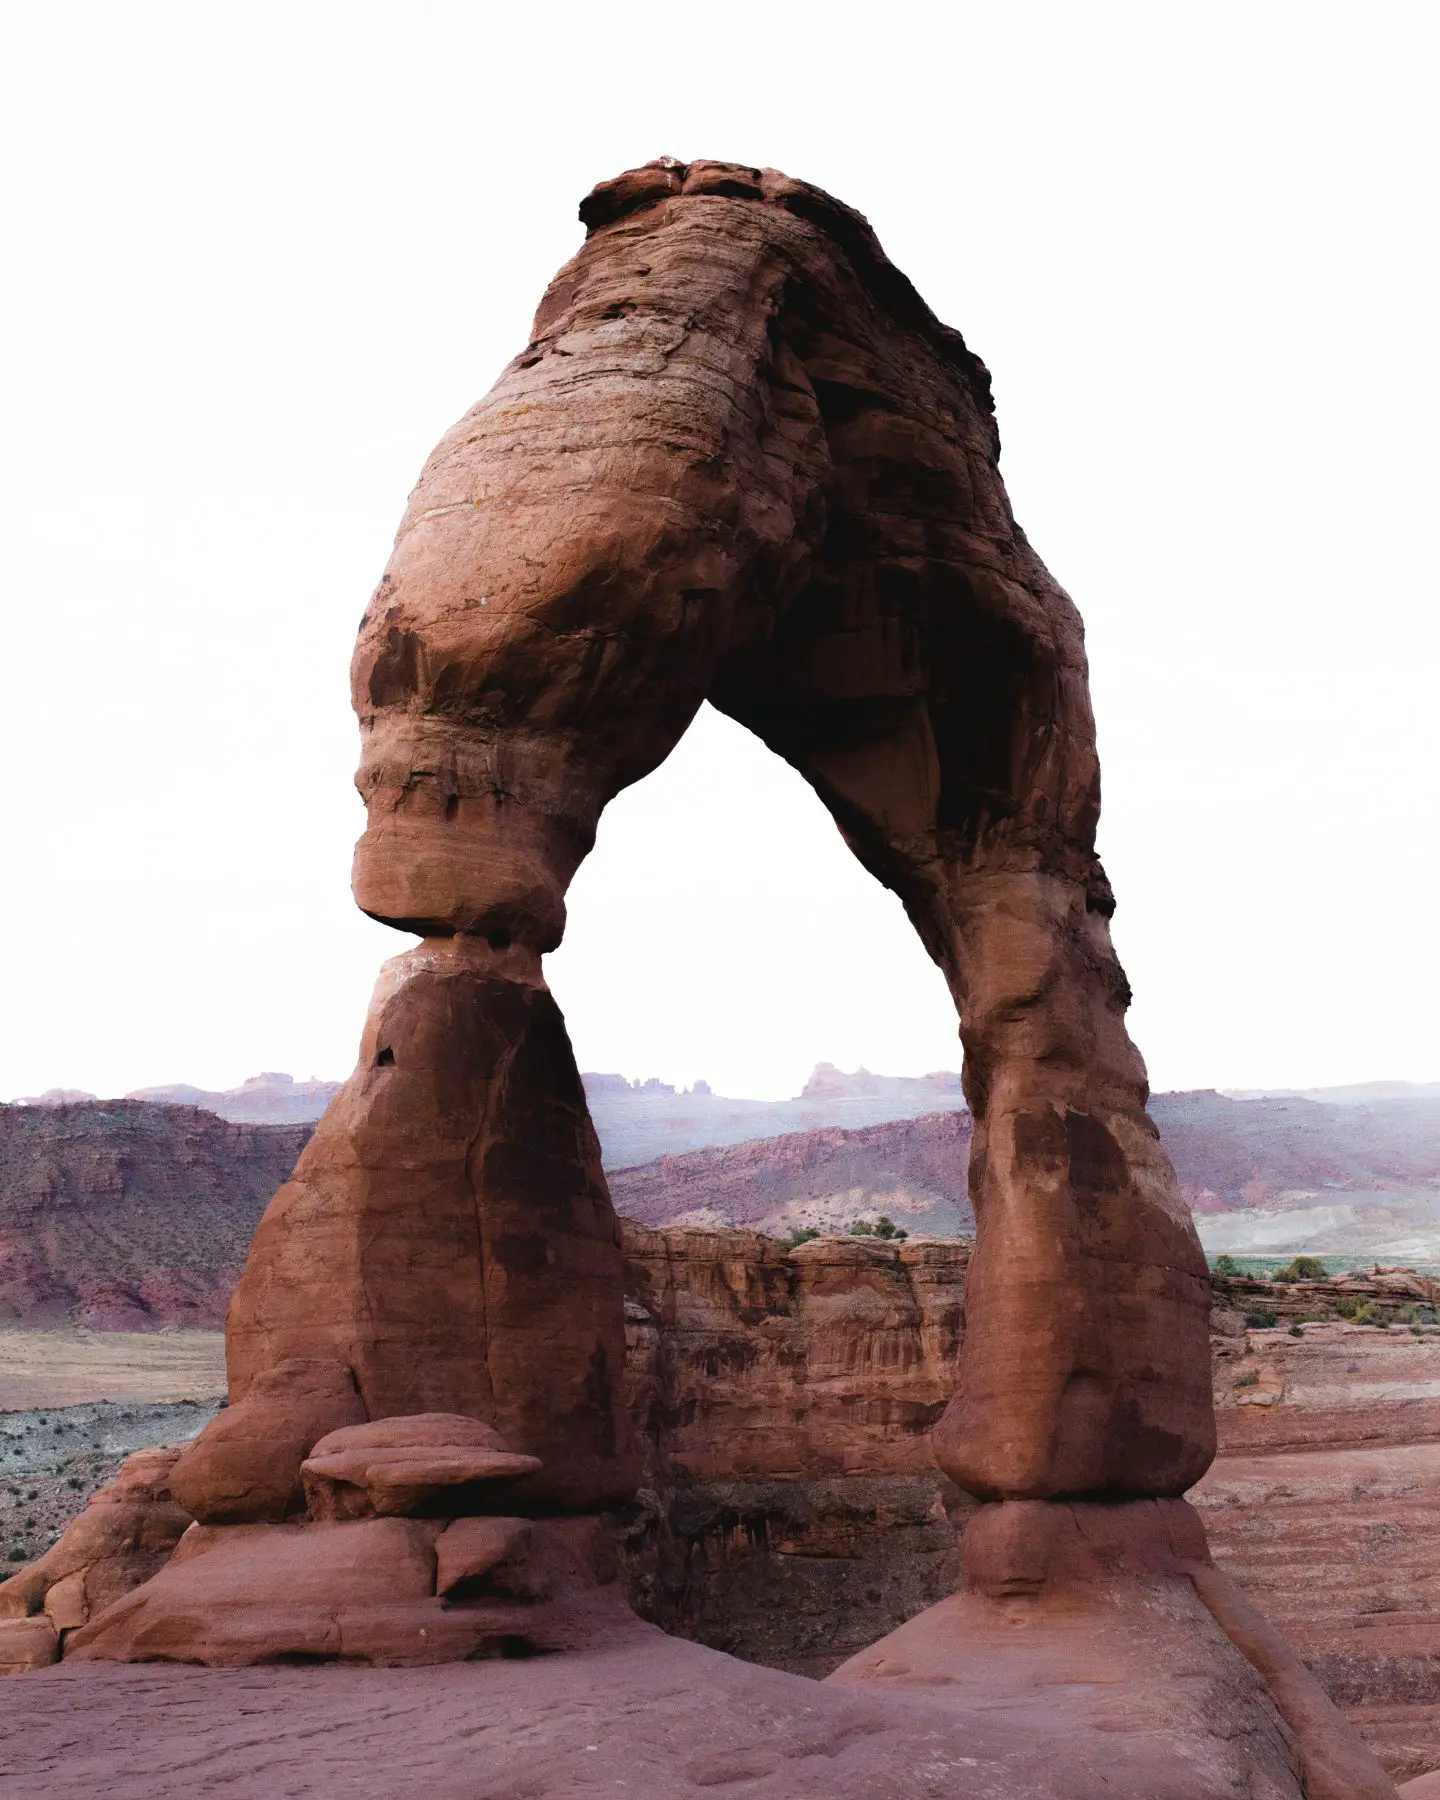 Read on for all the most up to date hiking details, trail description, hiking essentials, and tips for taking on the Delicate Arch hike in Arches National Park, Utah! This is one of the most photographed landmarks in all of Utah’s National Parks! Don’t miss this! #utah #nationalparks